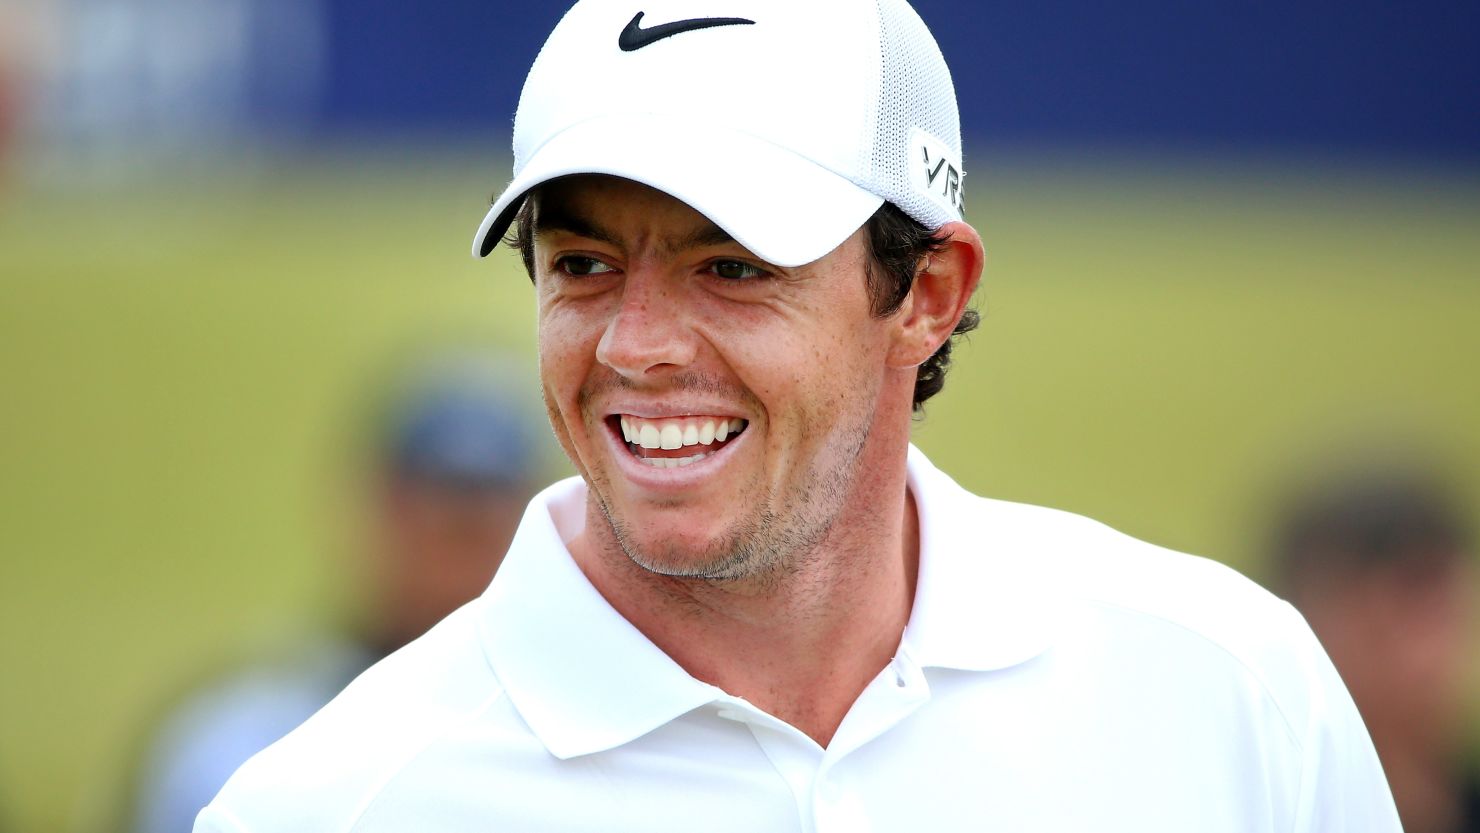 Rory McIlroy won the Dubai Desert Classic title for the second time last week.